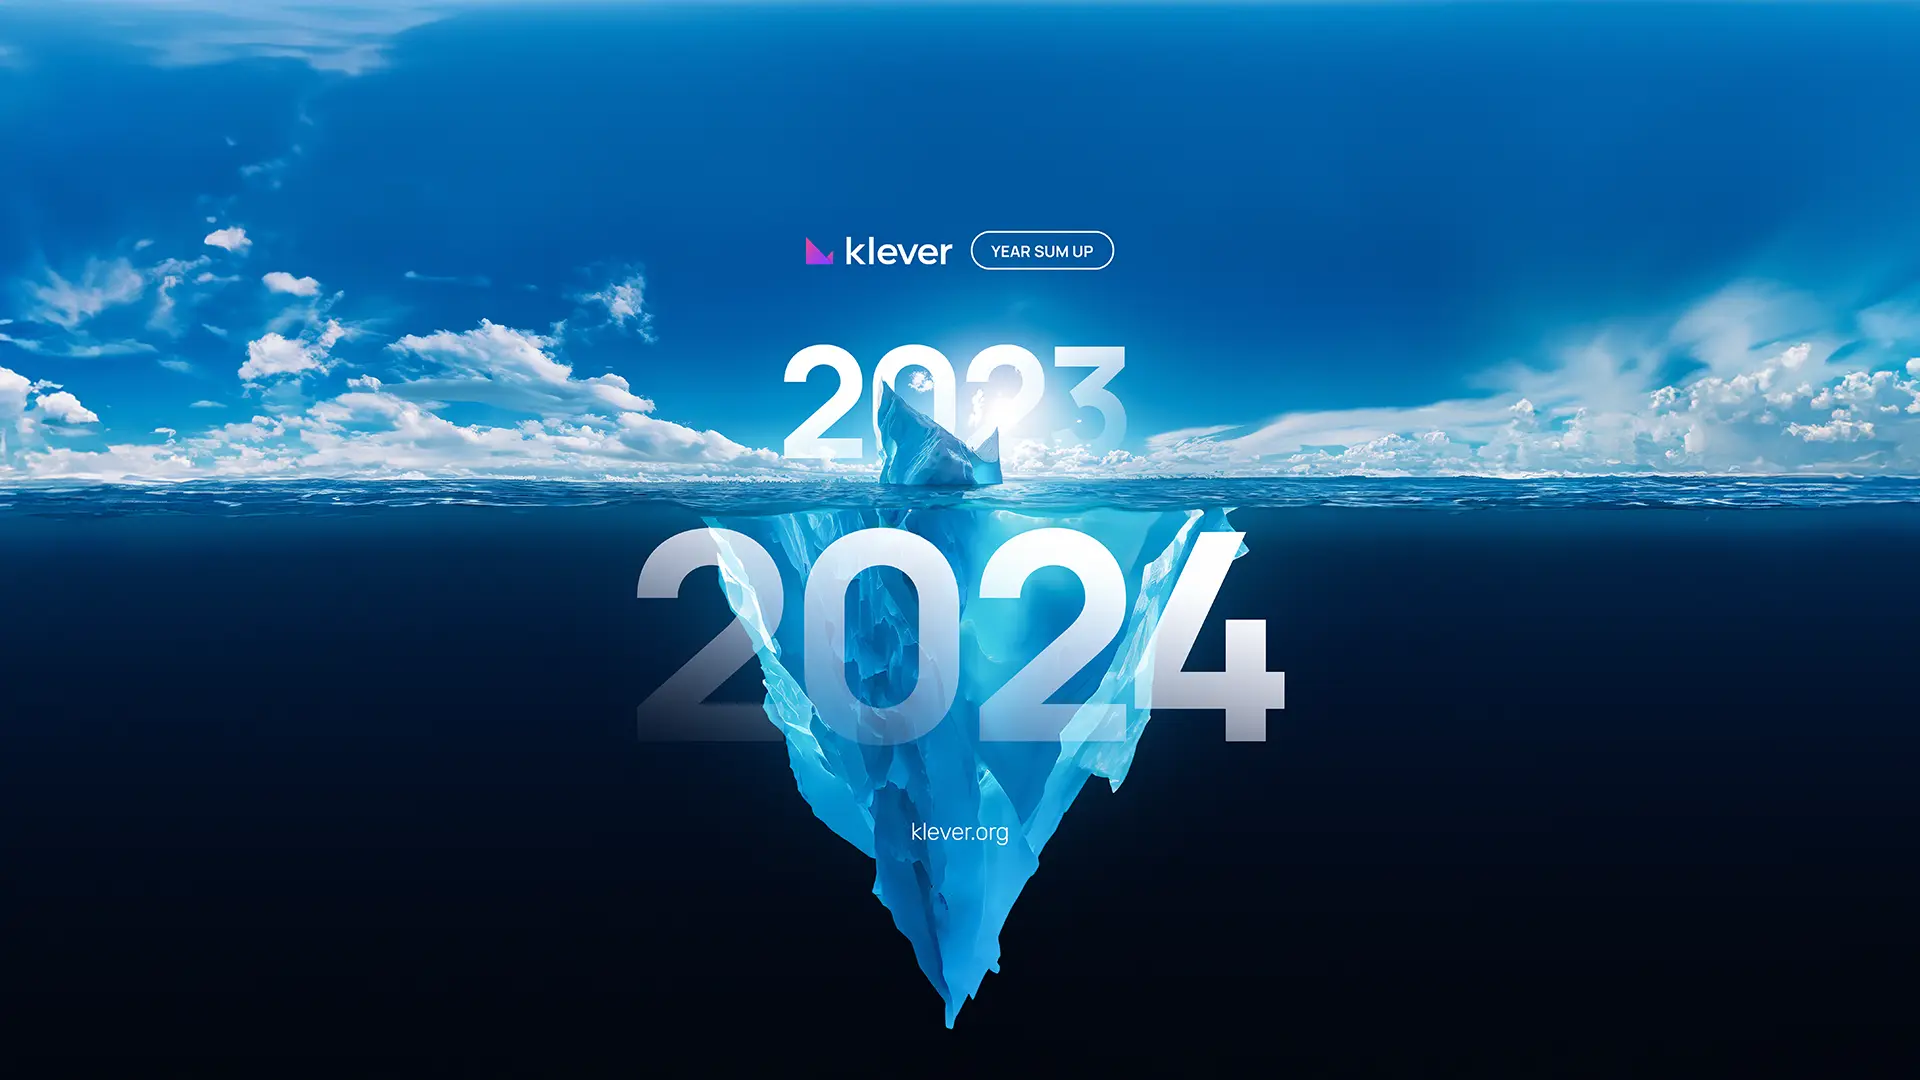 the images represent the transition of 2023 to 2024